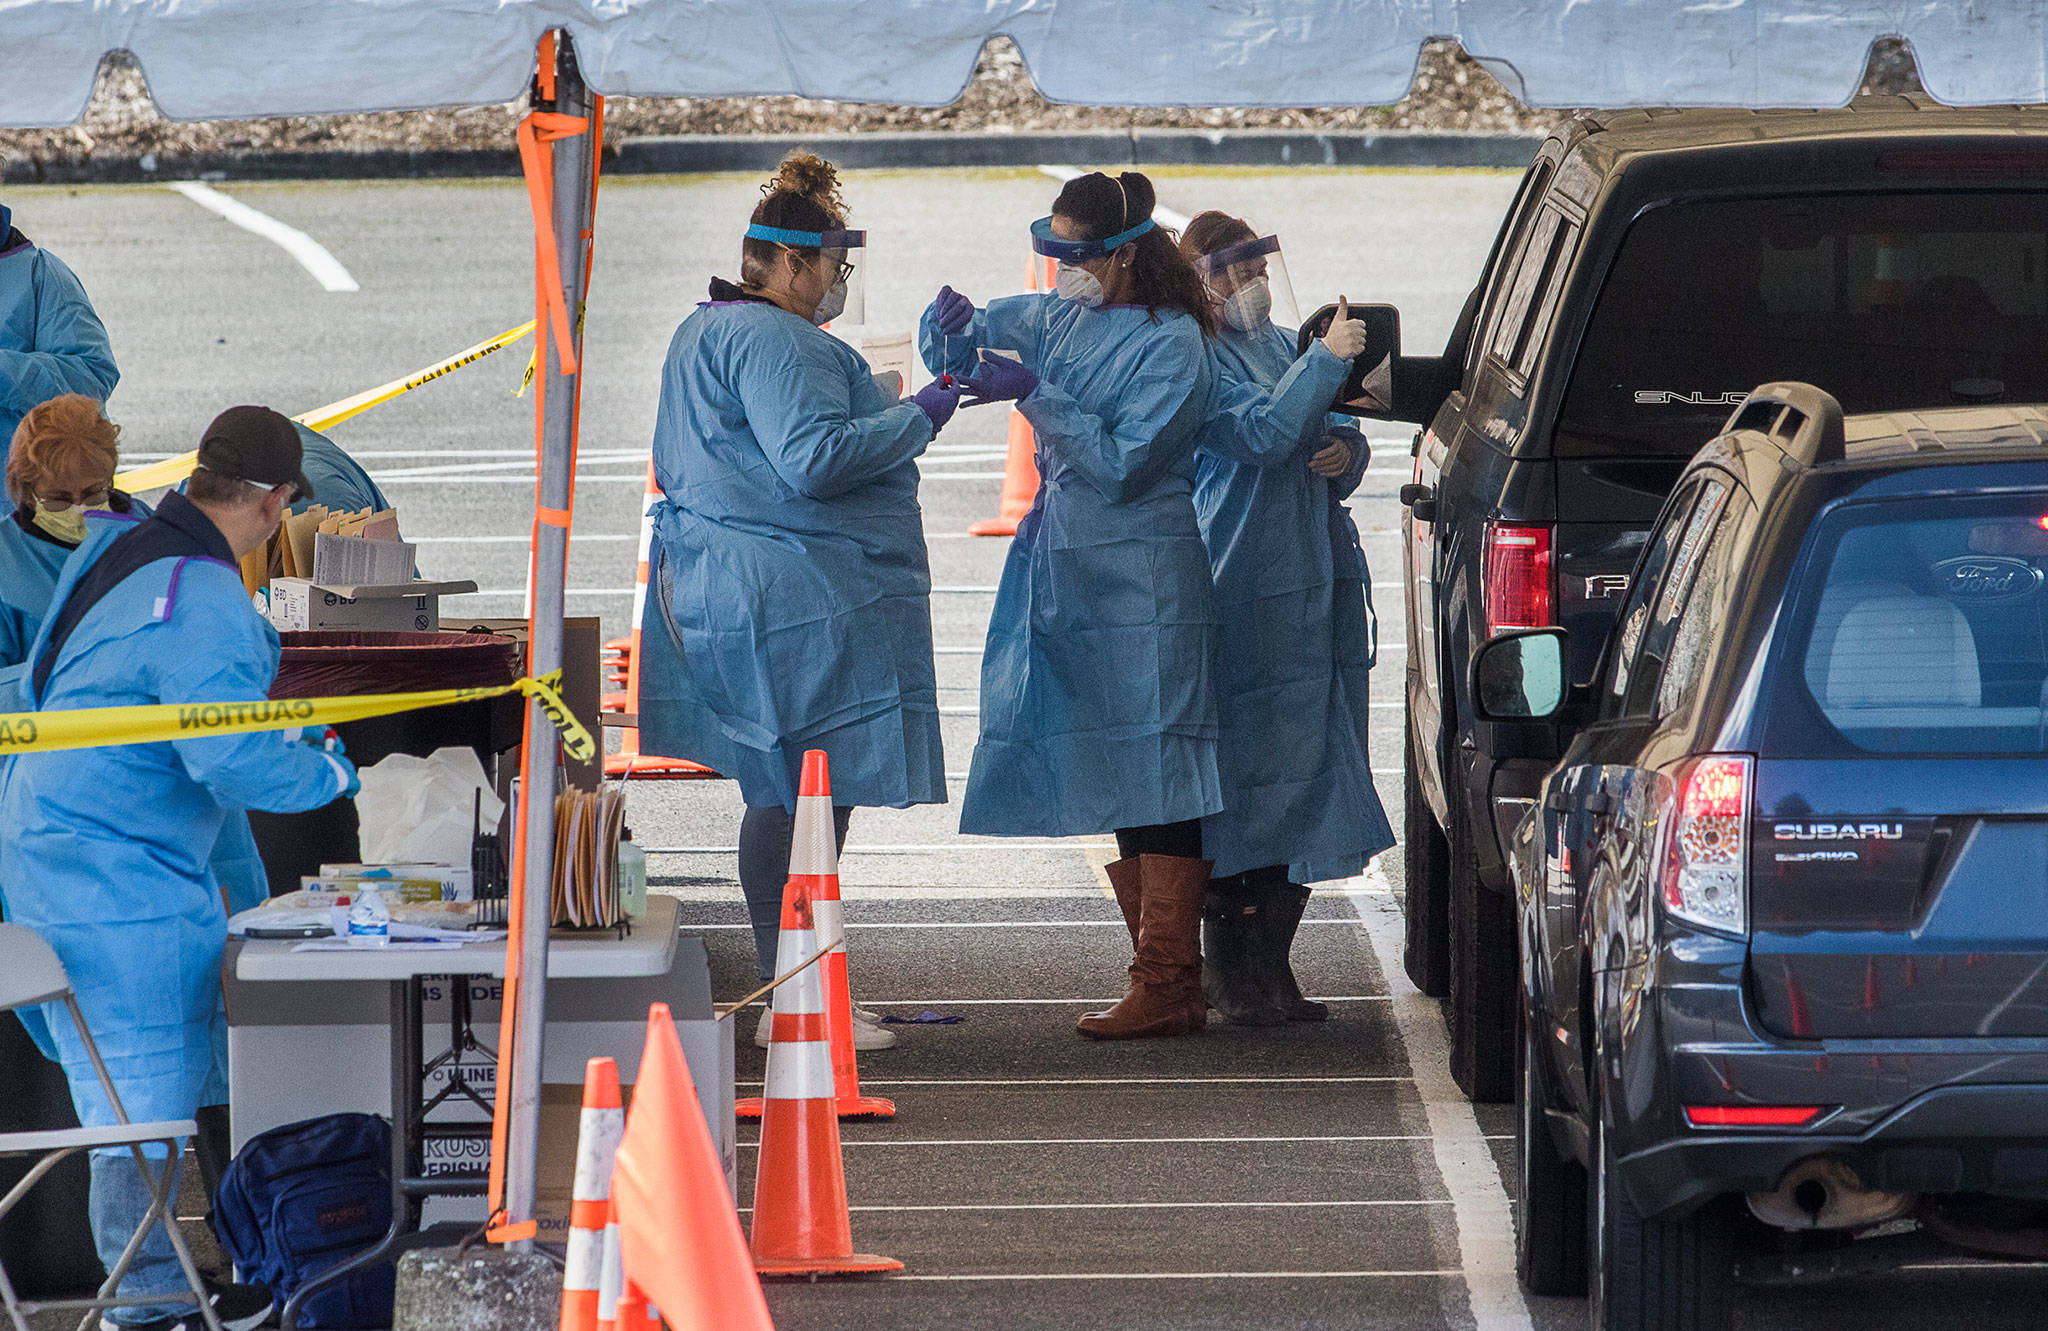 One medical worker gives a thumbs up as two others collect a swab after a test for the COVID-19 virus at a drive-thru testing site in the parking lot near Everett Memorial Stadium at 3900 Broadway on March 23 in Everett. (Andy Bronson / Herald file)